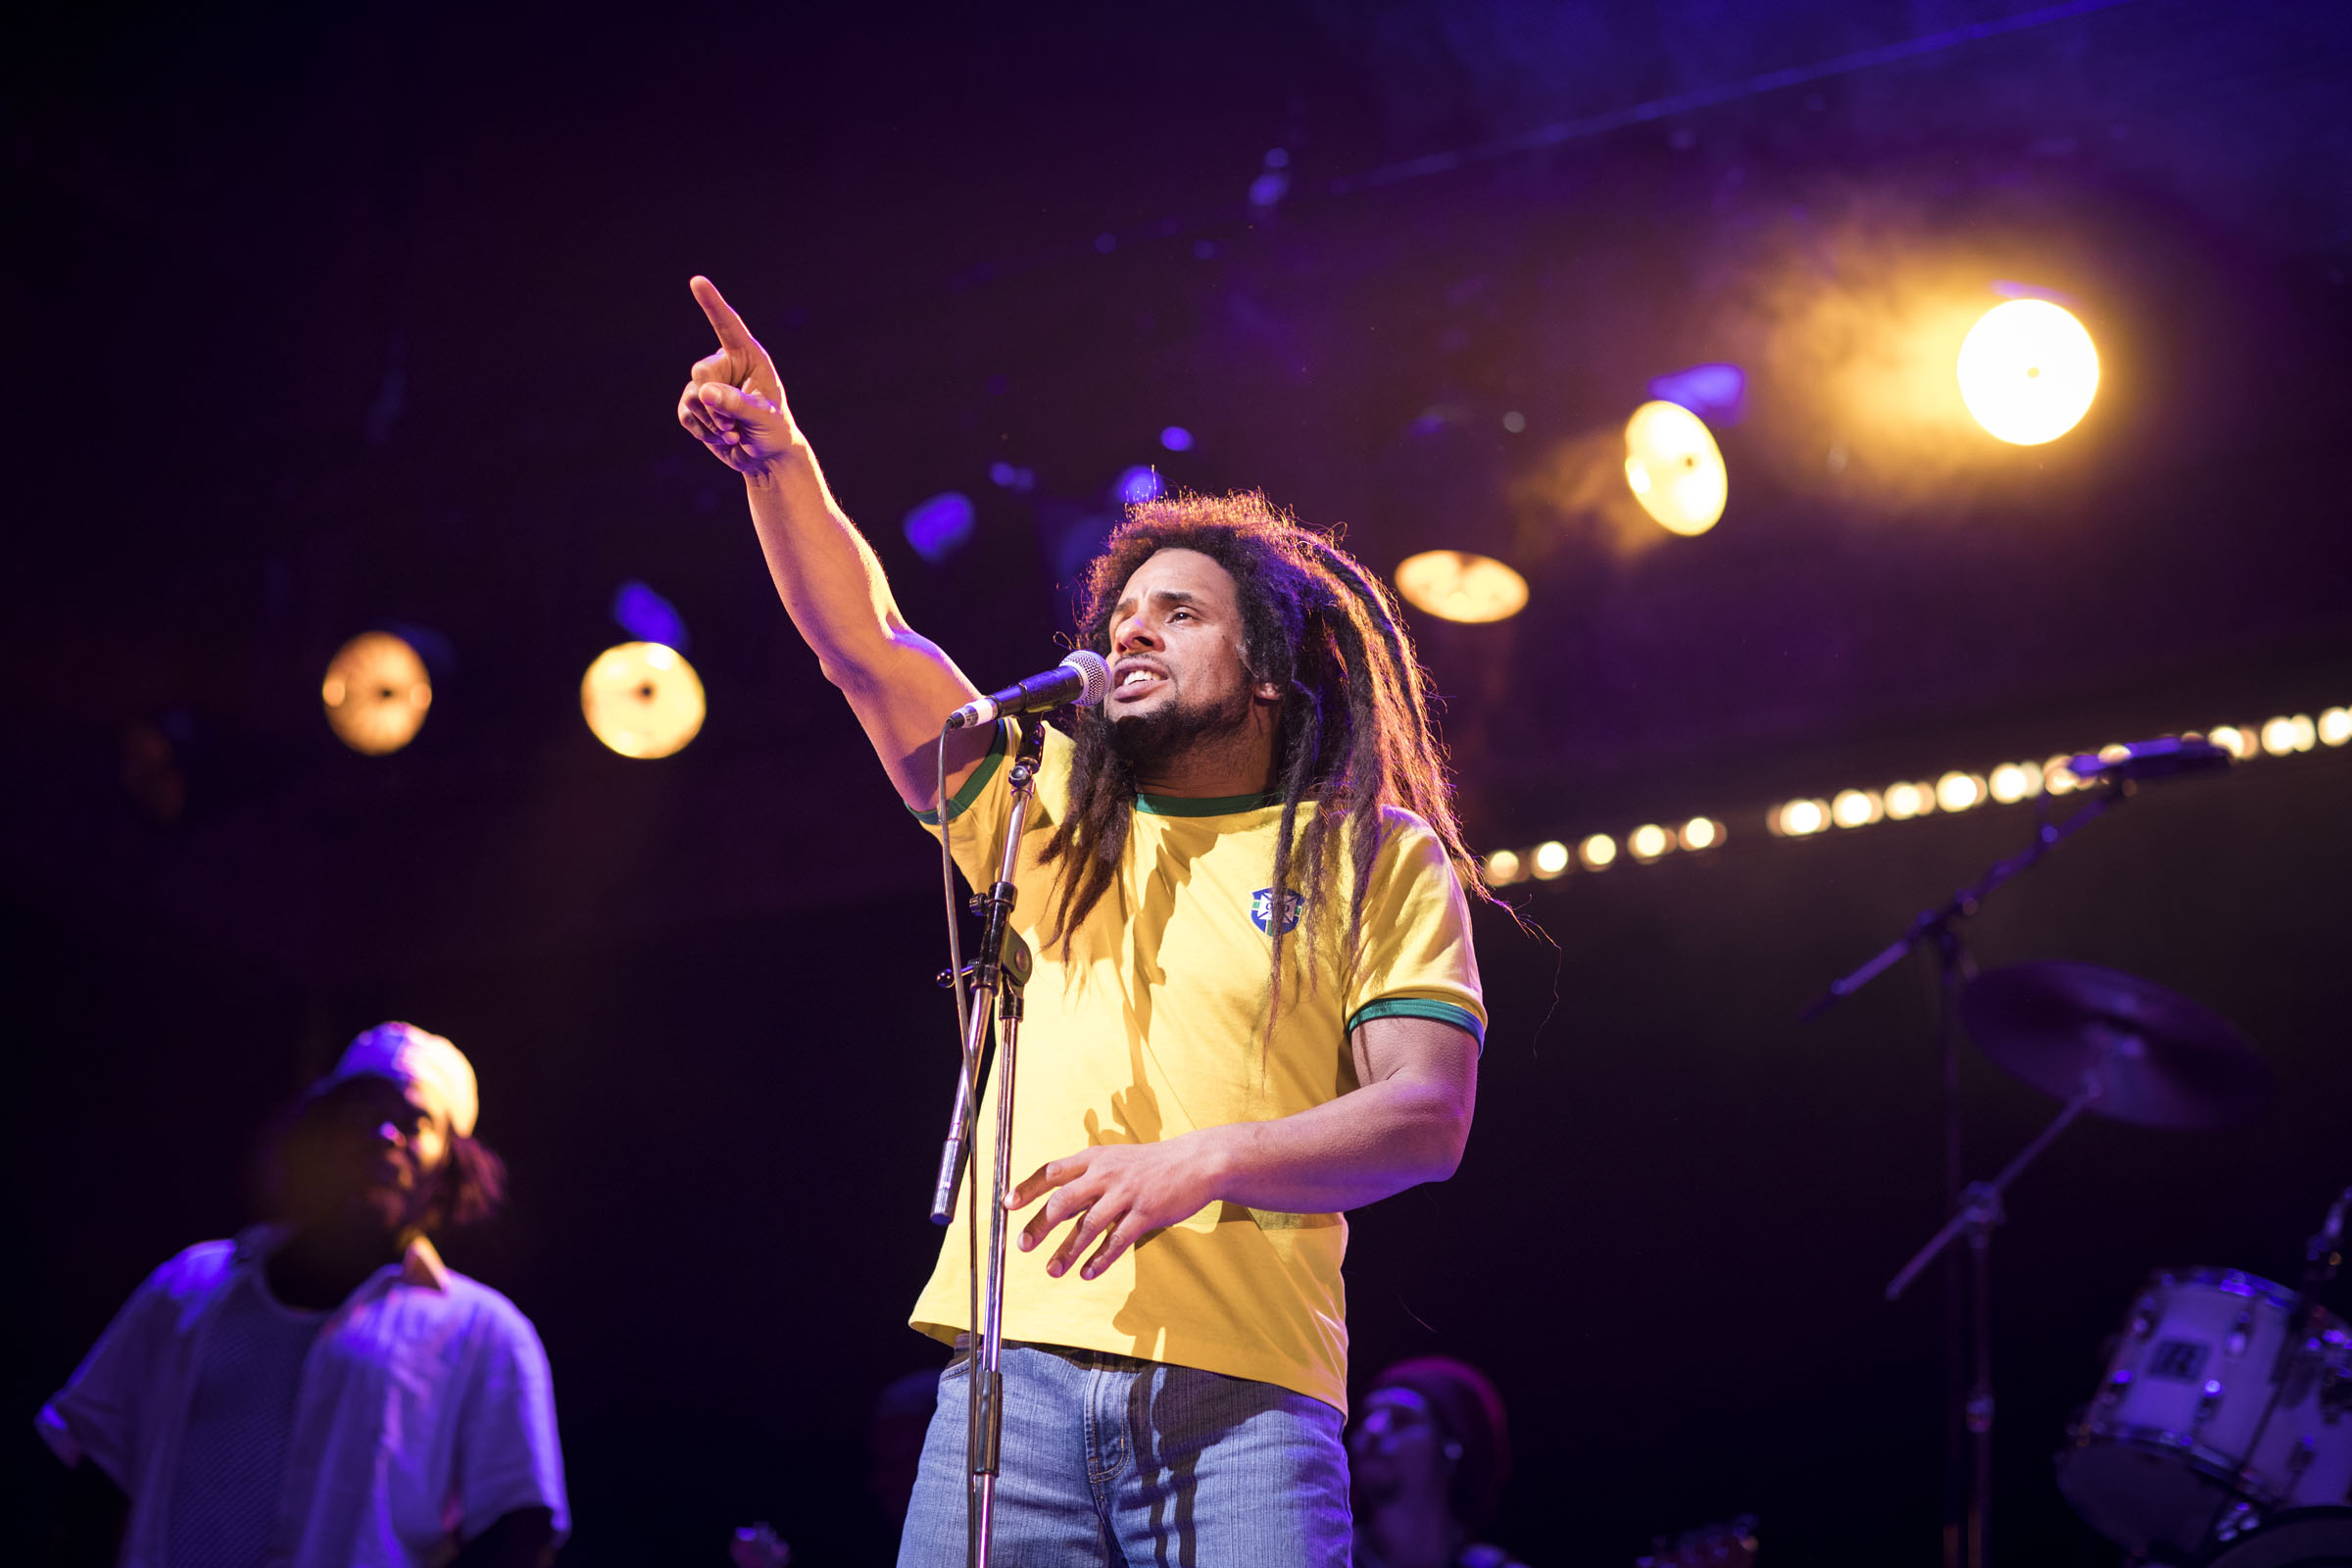 Mitchell Brunings stars as Bob Marley in the Musical 'One Love'